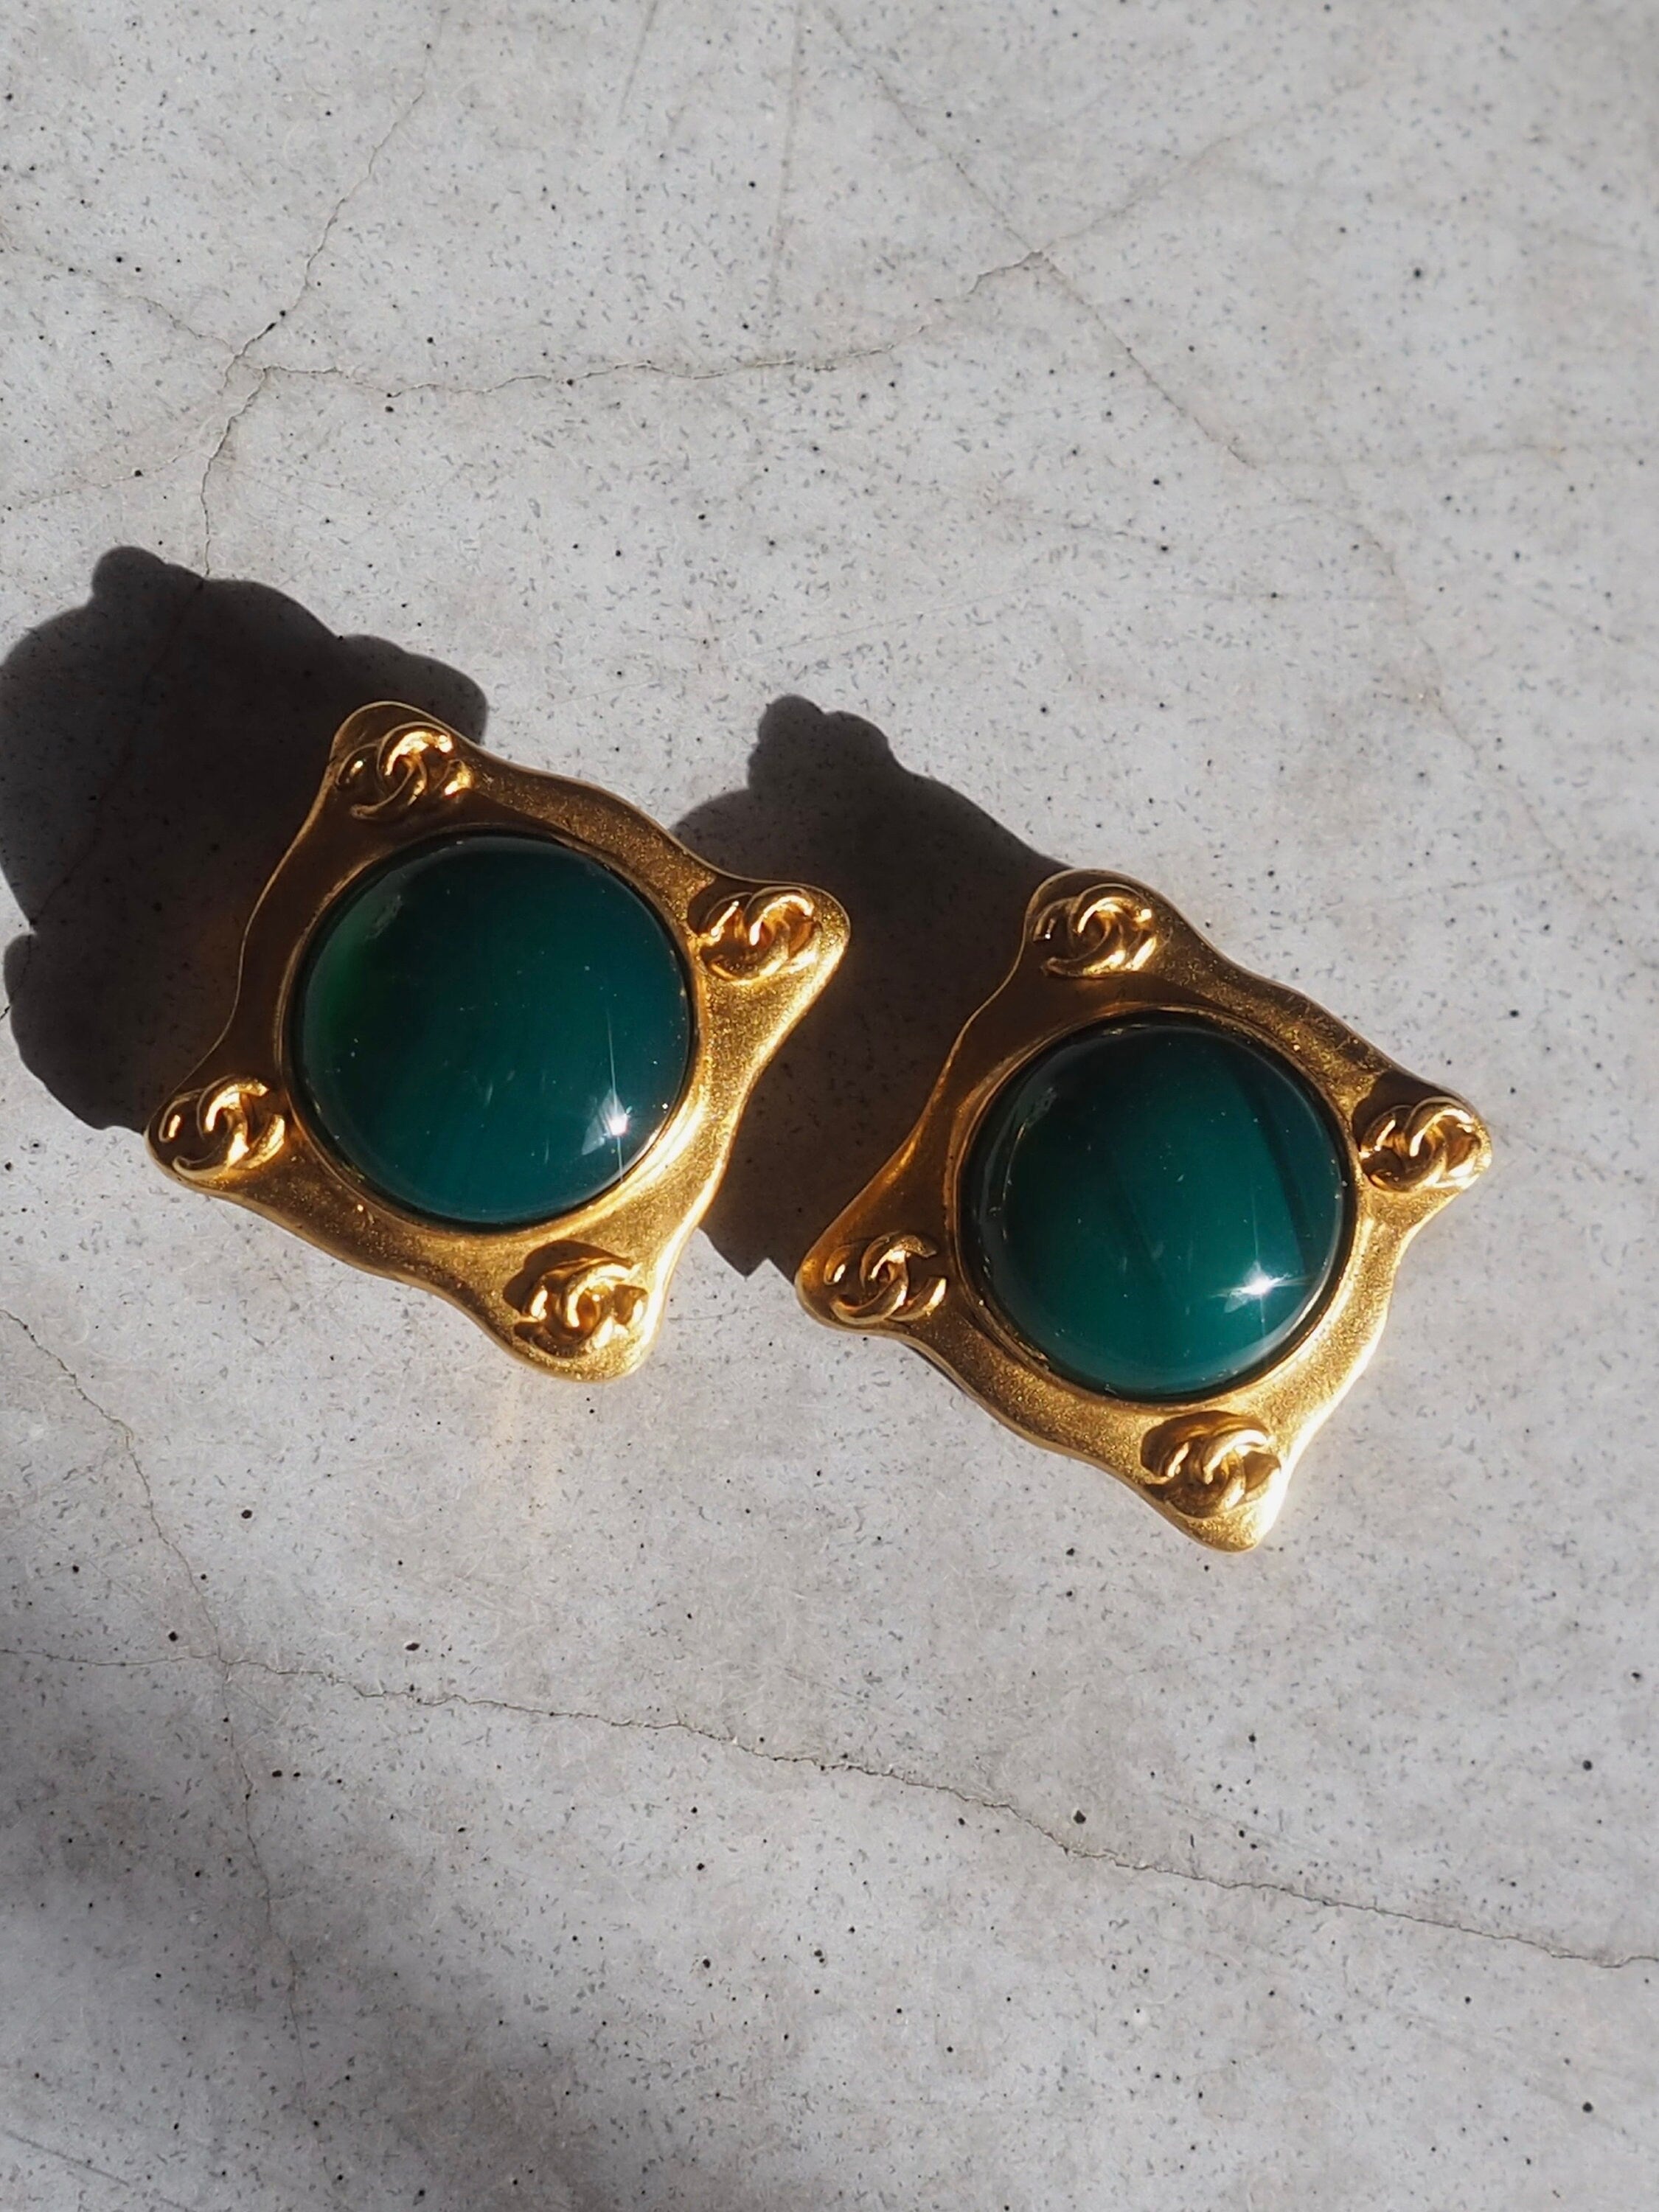 CHANEL Stone CC Logo Earrings Metal Gold Tone Green Vintage Authentic